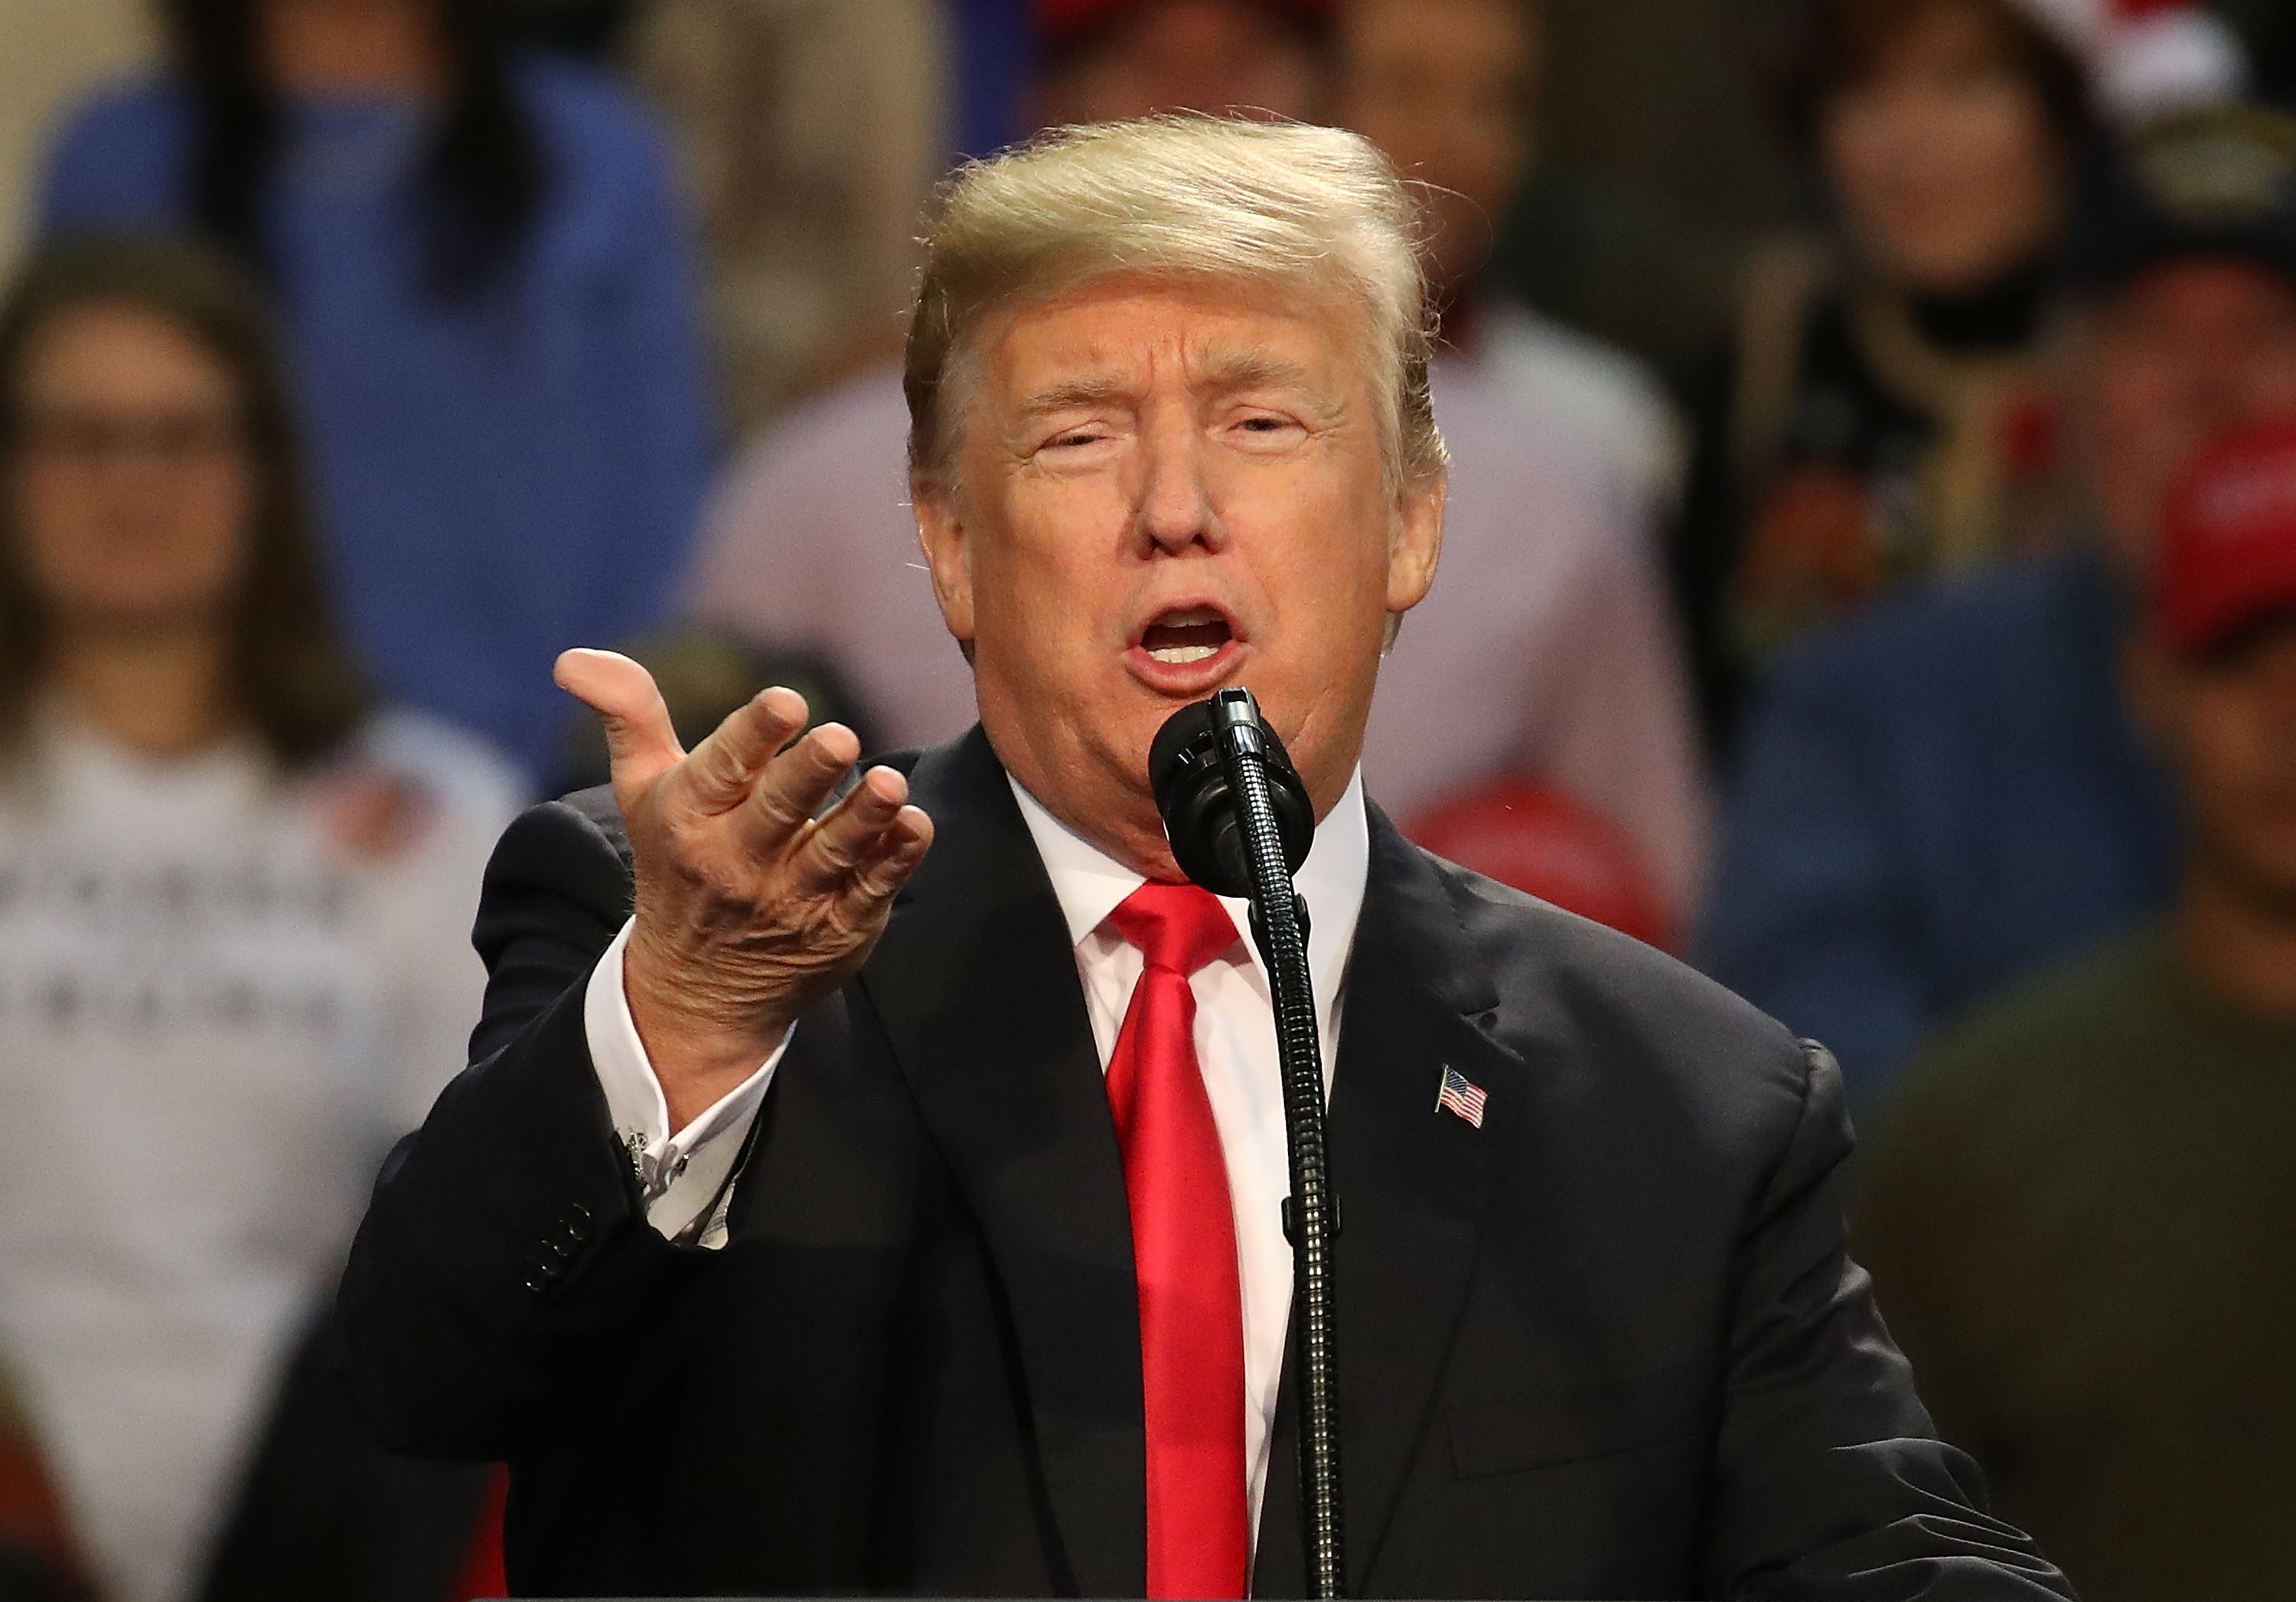 PENSACOLA, FL - DECEMBER 08:  U.S. President Donald Trump speaks during a rally at the Pensacola Bay Center on December 8, 2017 in Pensacola, Florida.  Mr. Trump was expected to further endorse Alabama Republican Senatorial candidate Roy Moore who is running against Democratic challenger Doug Jones in the adjacent state.  (Photo by Joe Raedle/Getty Images) (Joe Raedle&mdash;Getty Images)